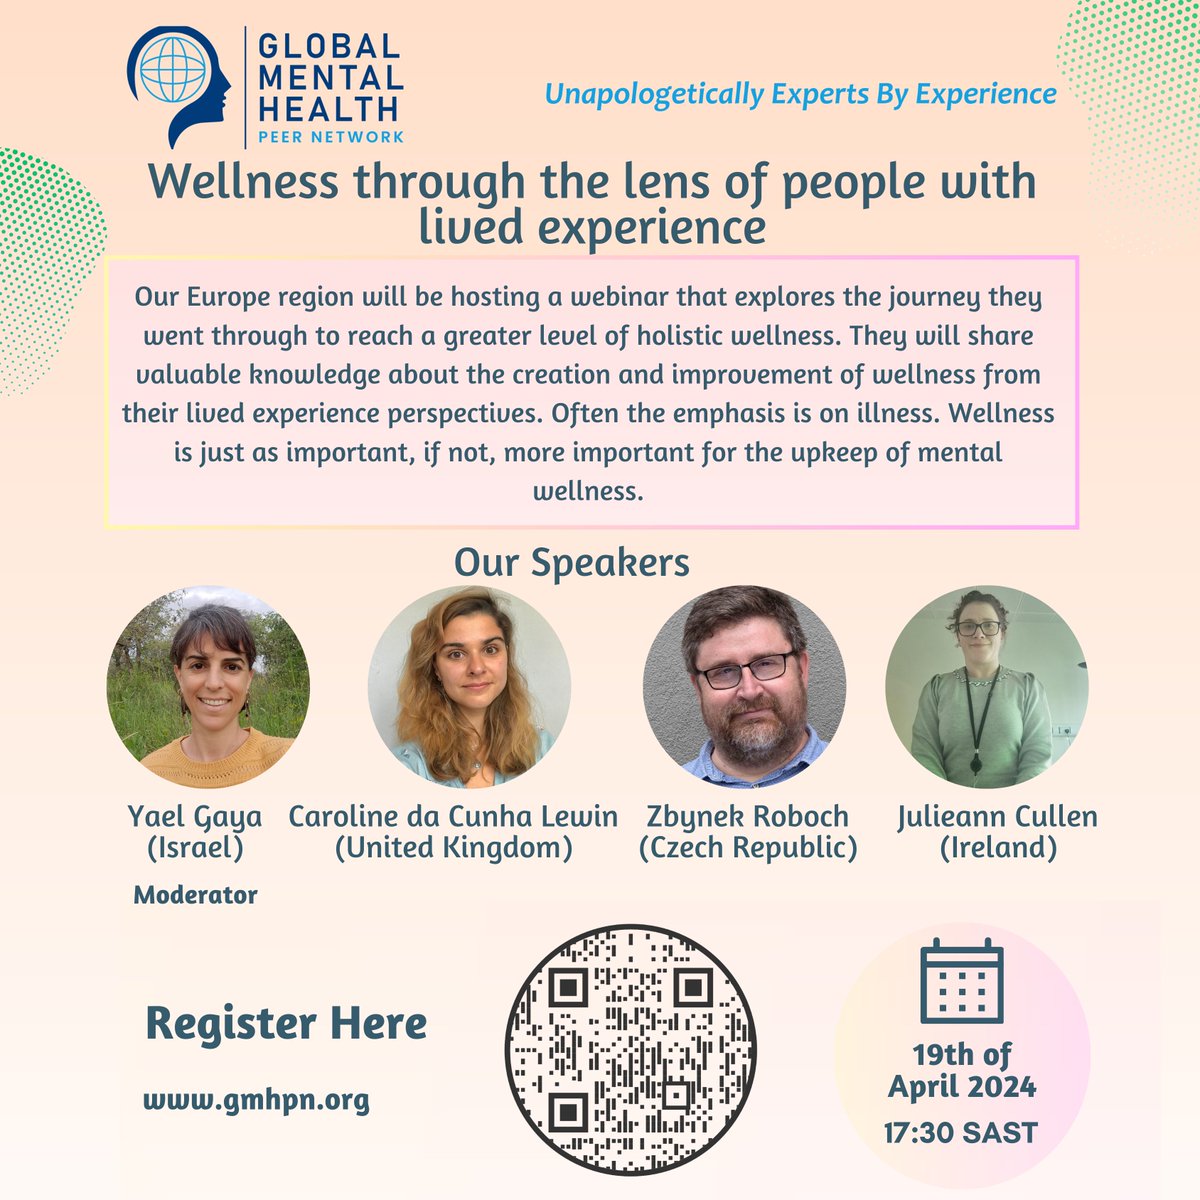 Our European region, chaired by Yael Gaya will be hosting a webinar on 19th April at 5:30 PM SAST on Wellness through the lens of people with lived experience Hear valuable insights from our members and share them with your networks. 🌍 Register here: us06web.zoom.us/meeting/regist…